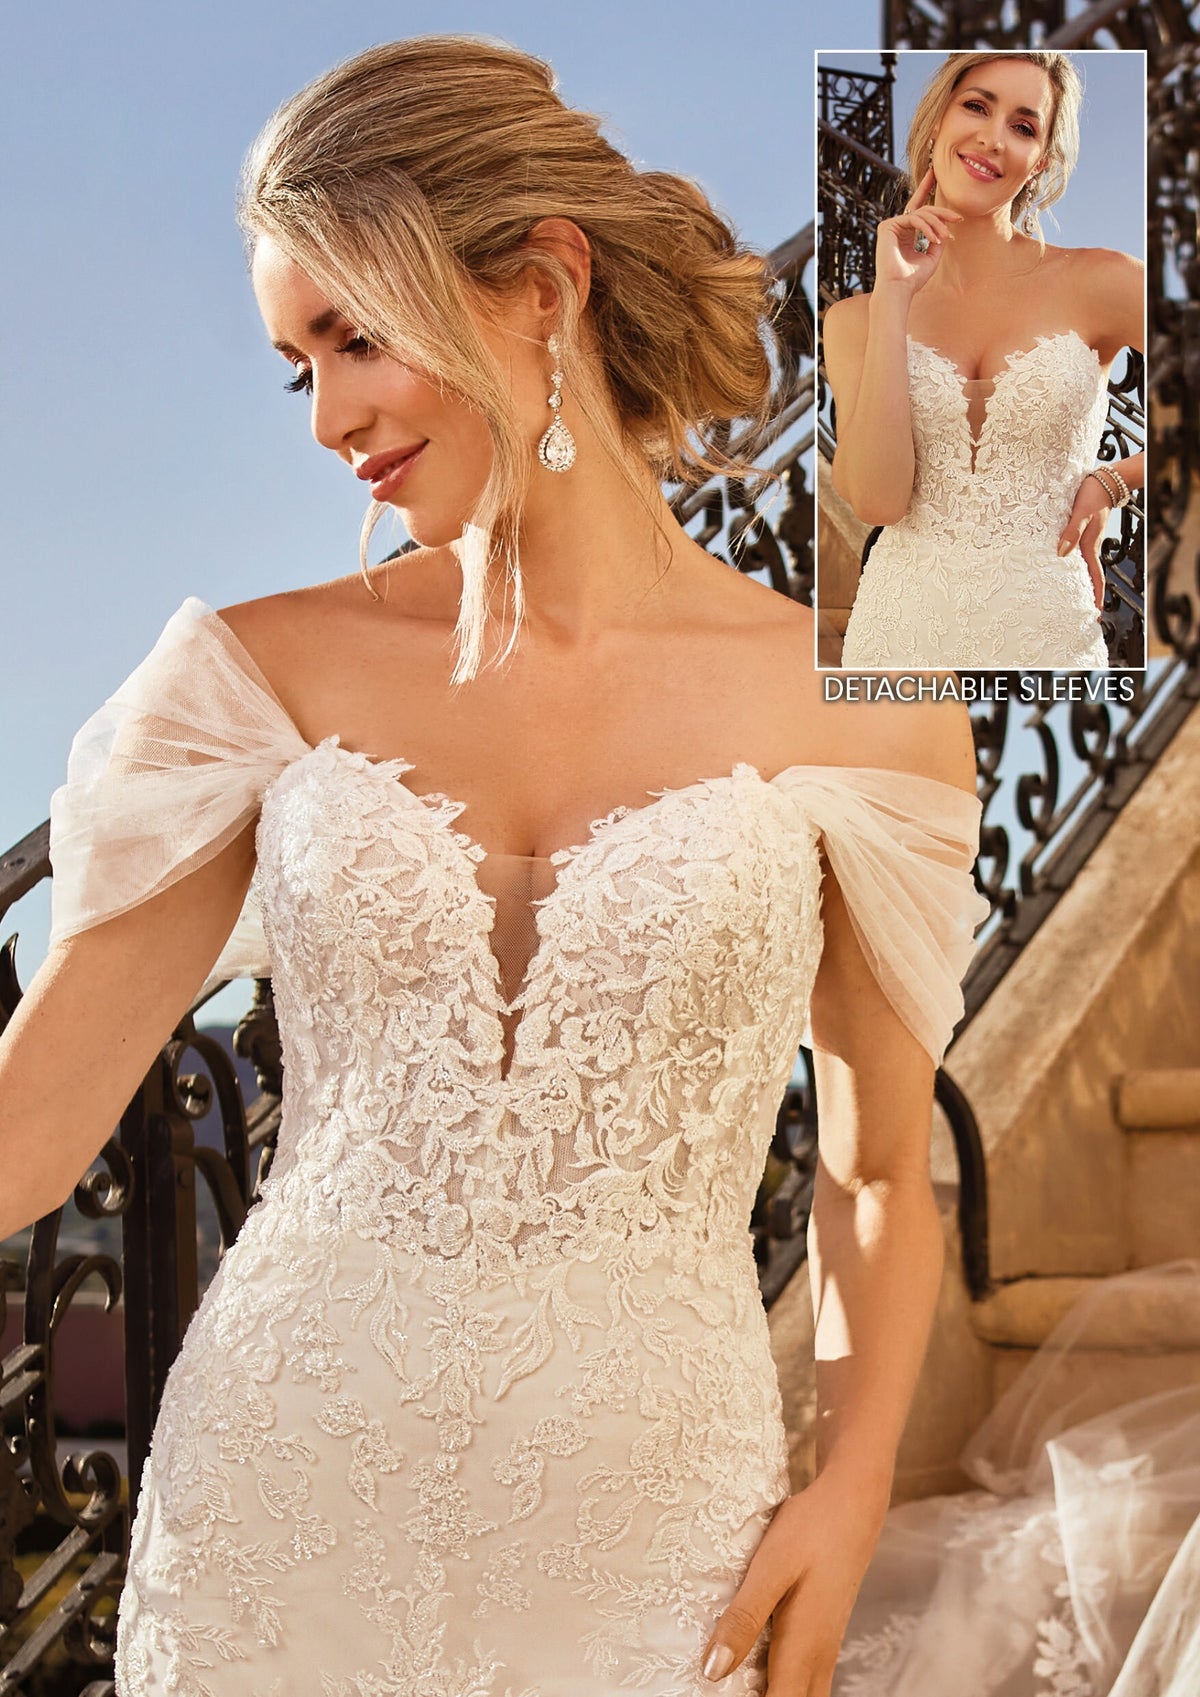 Luxurious Fit and Flare Detachable Off the Shoulder Sleeves Sweetheart Neckline Wedding Dress Bridal Gown Open Back Long Train Strapless